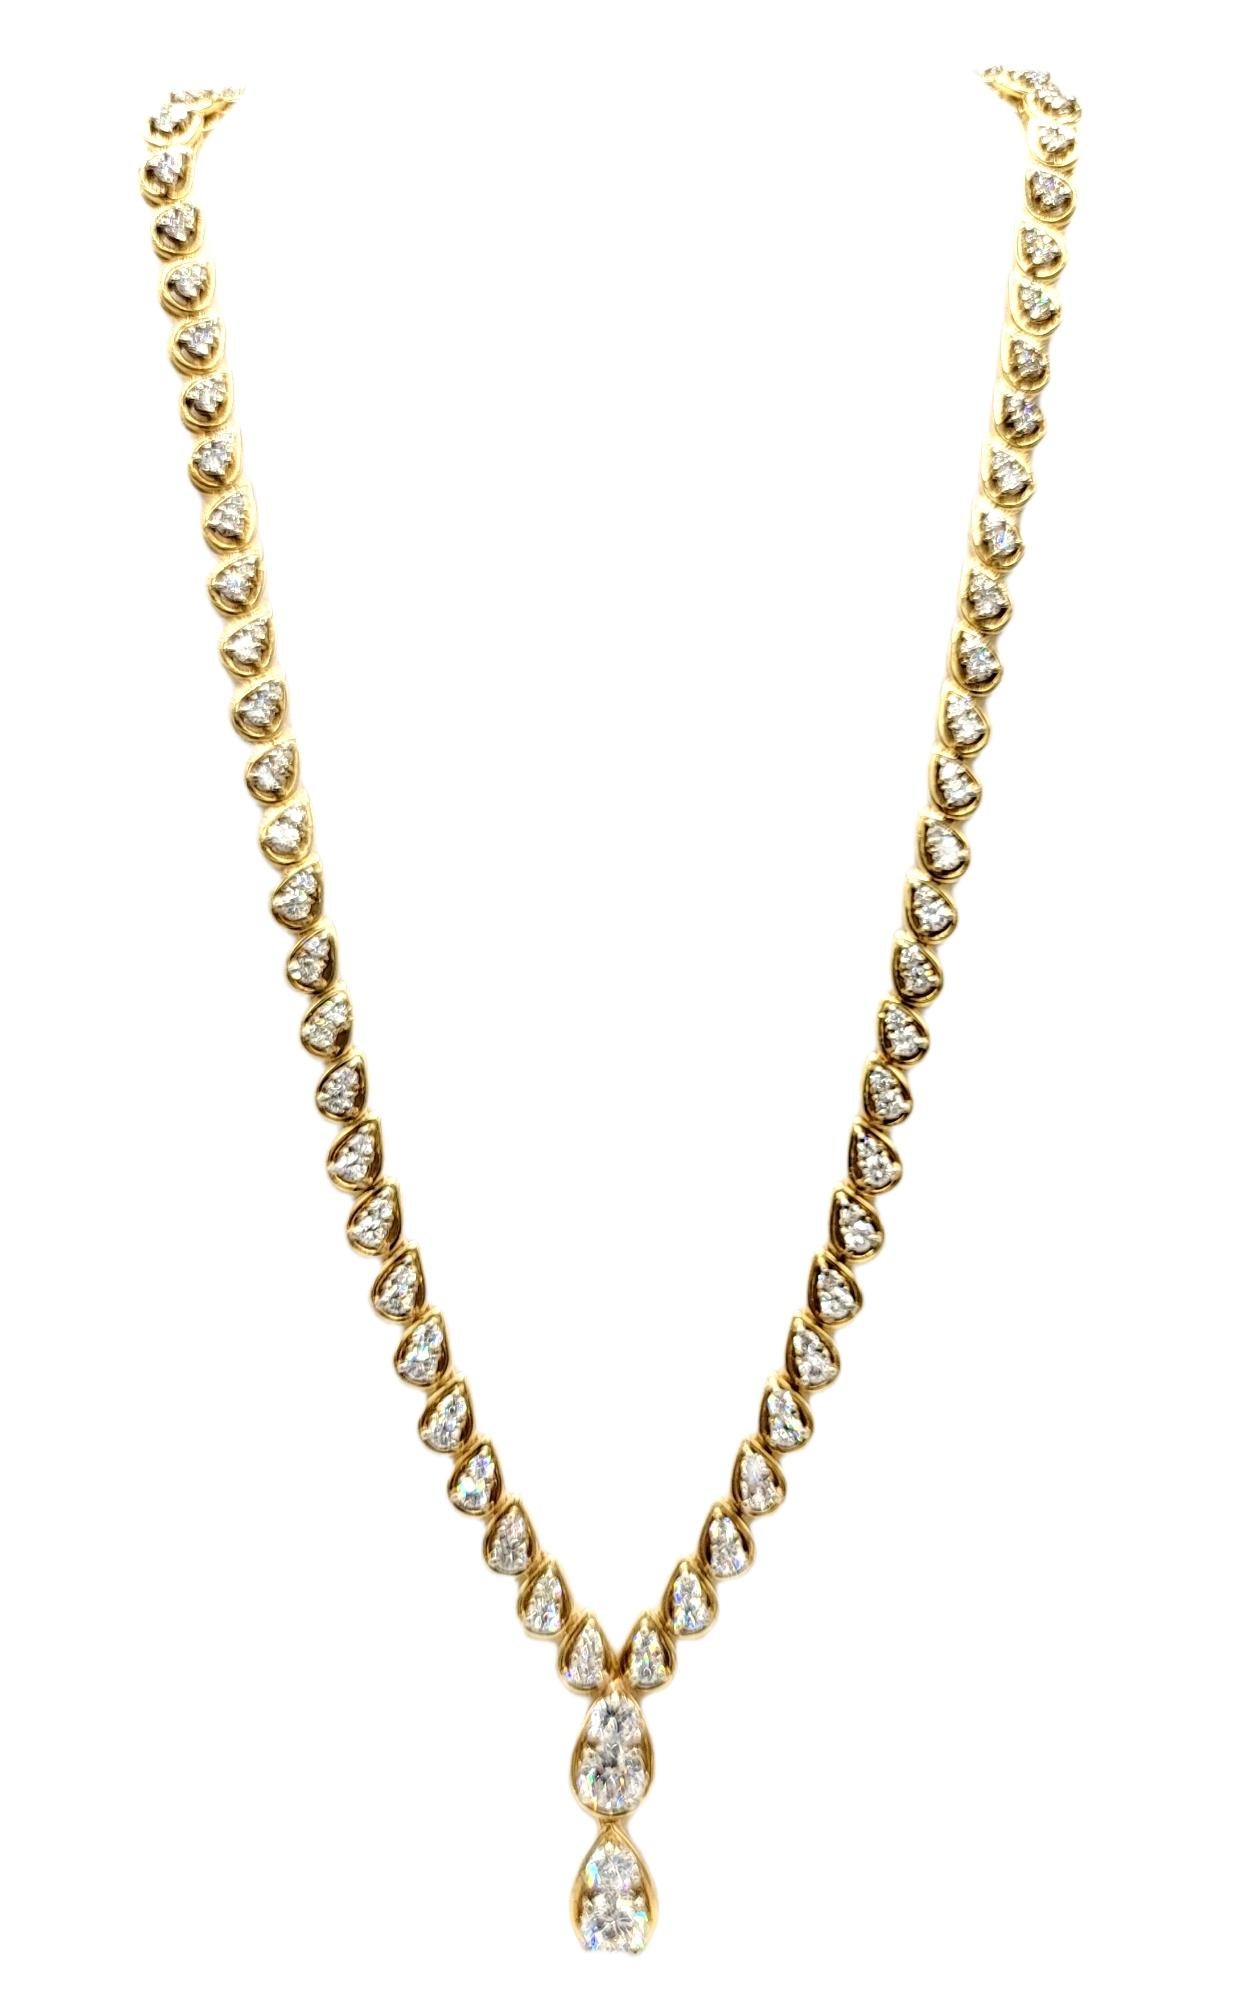 11.75 Carats Total Diamond Pear Shape Graduated Drop Link Necklace 18 Karat Gold In Good Condition For Sale In Scottsdale, AZ